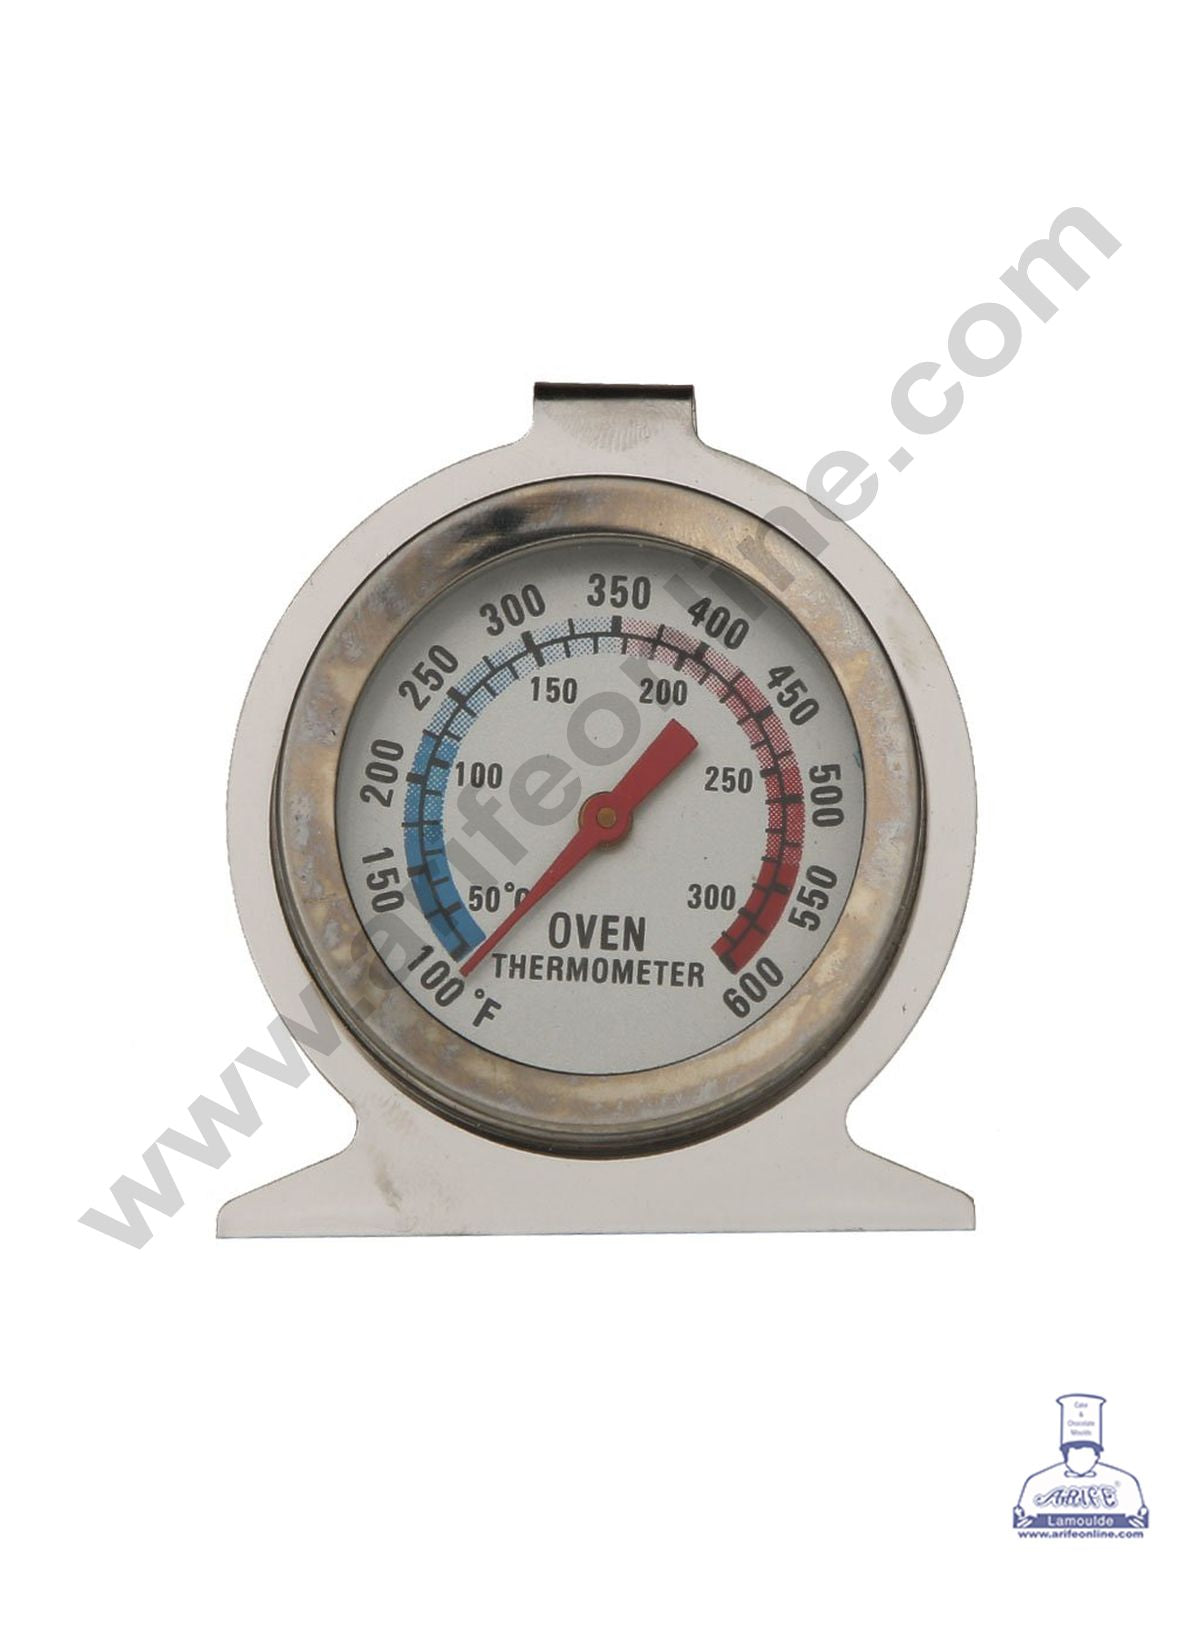 Oven Thermometer 150-550 F. - Brenda's Cakes Supply